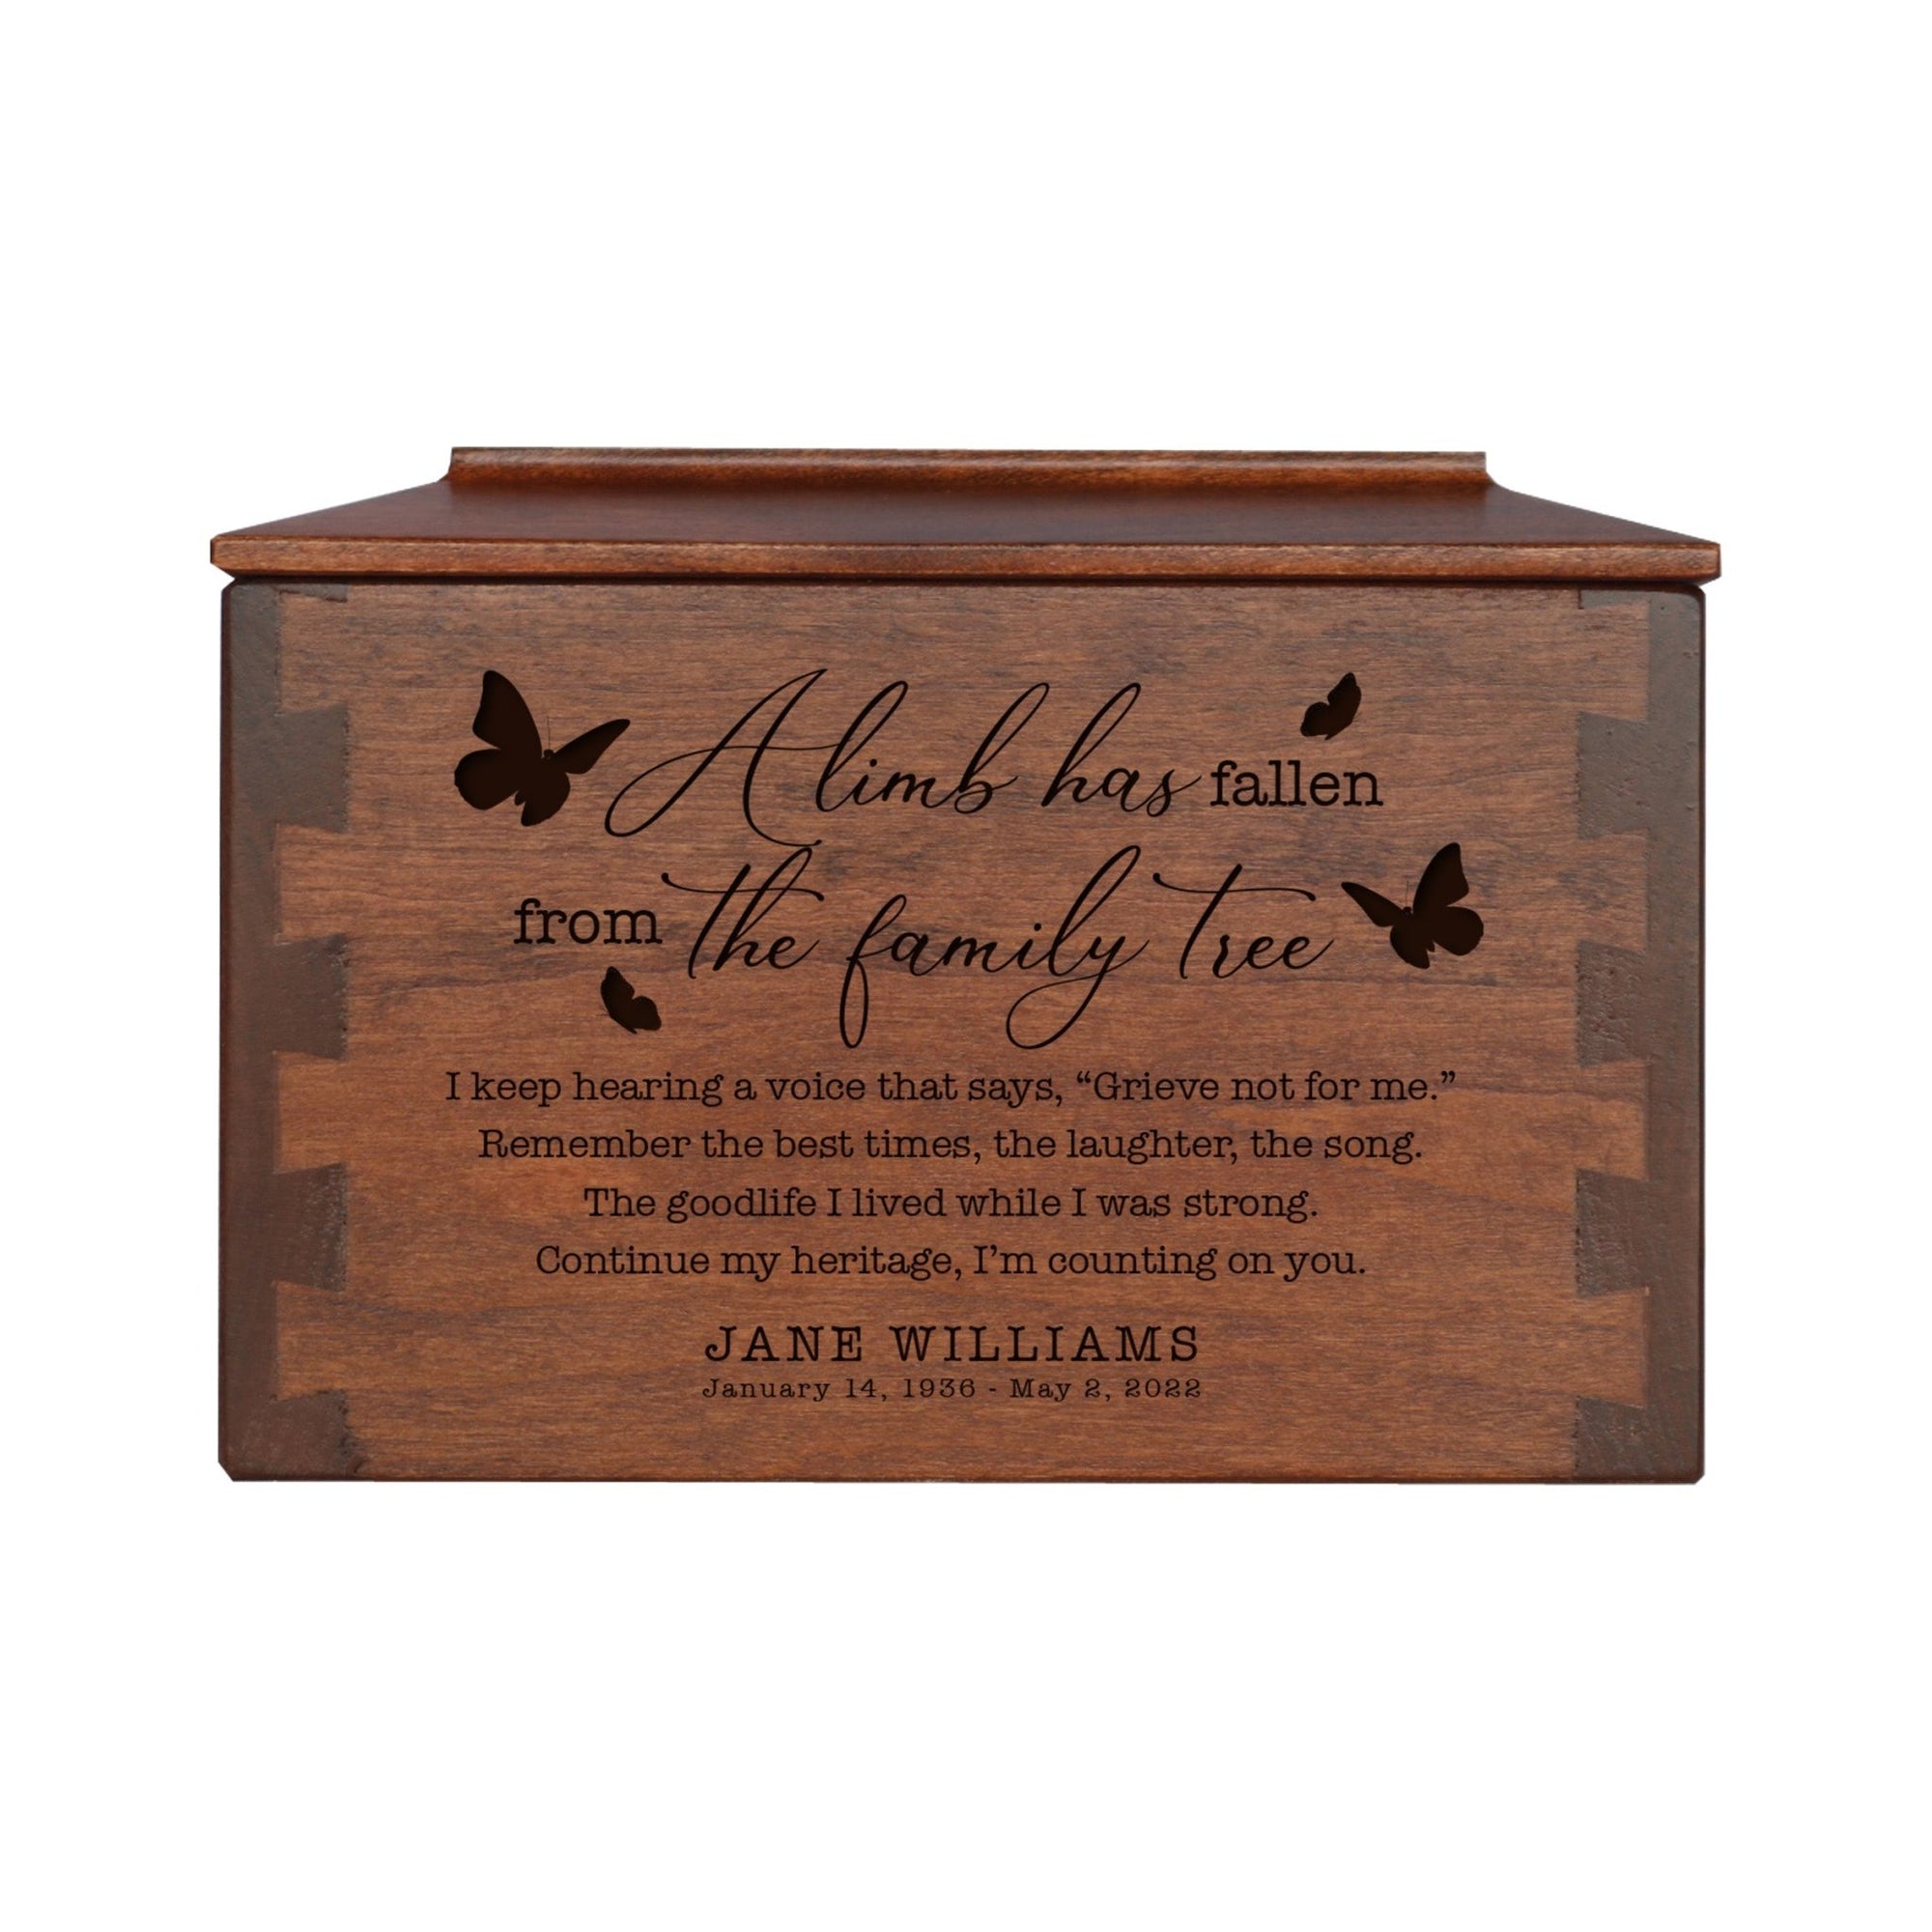 Custom-Engraved Memorial Cremation Small Dovetail Urn For Human Ashes - A Limb Has fallen - LifeSong Milestones